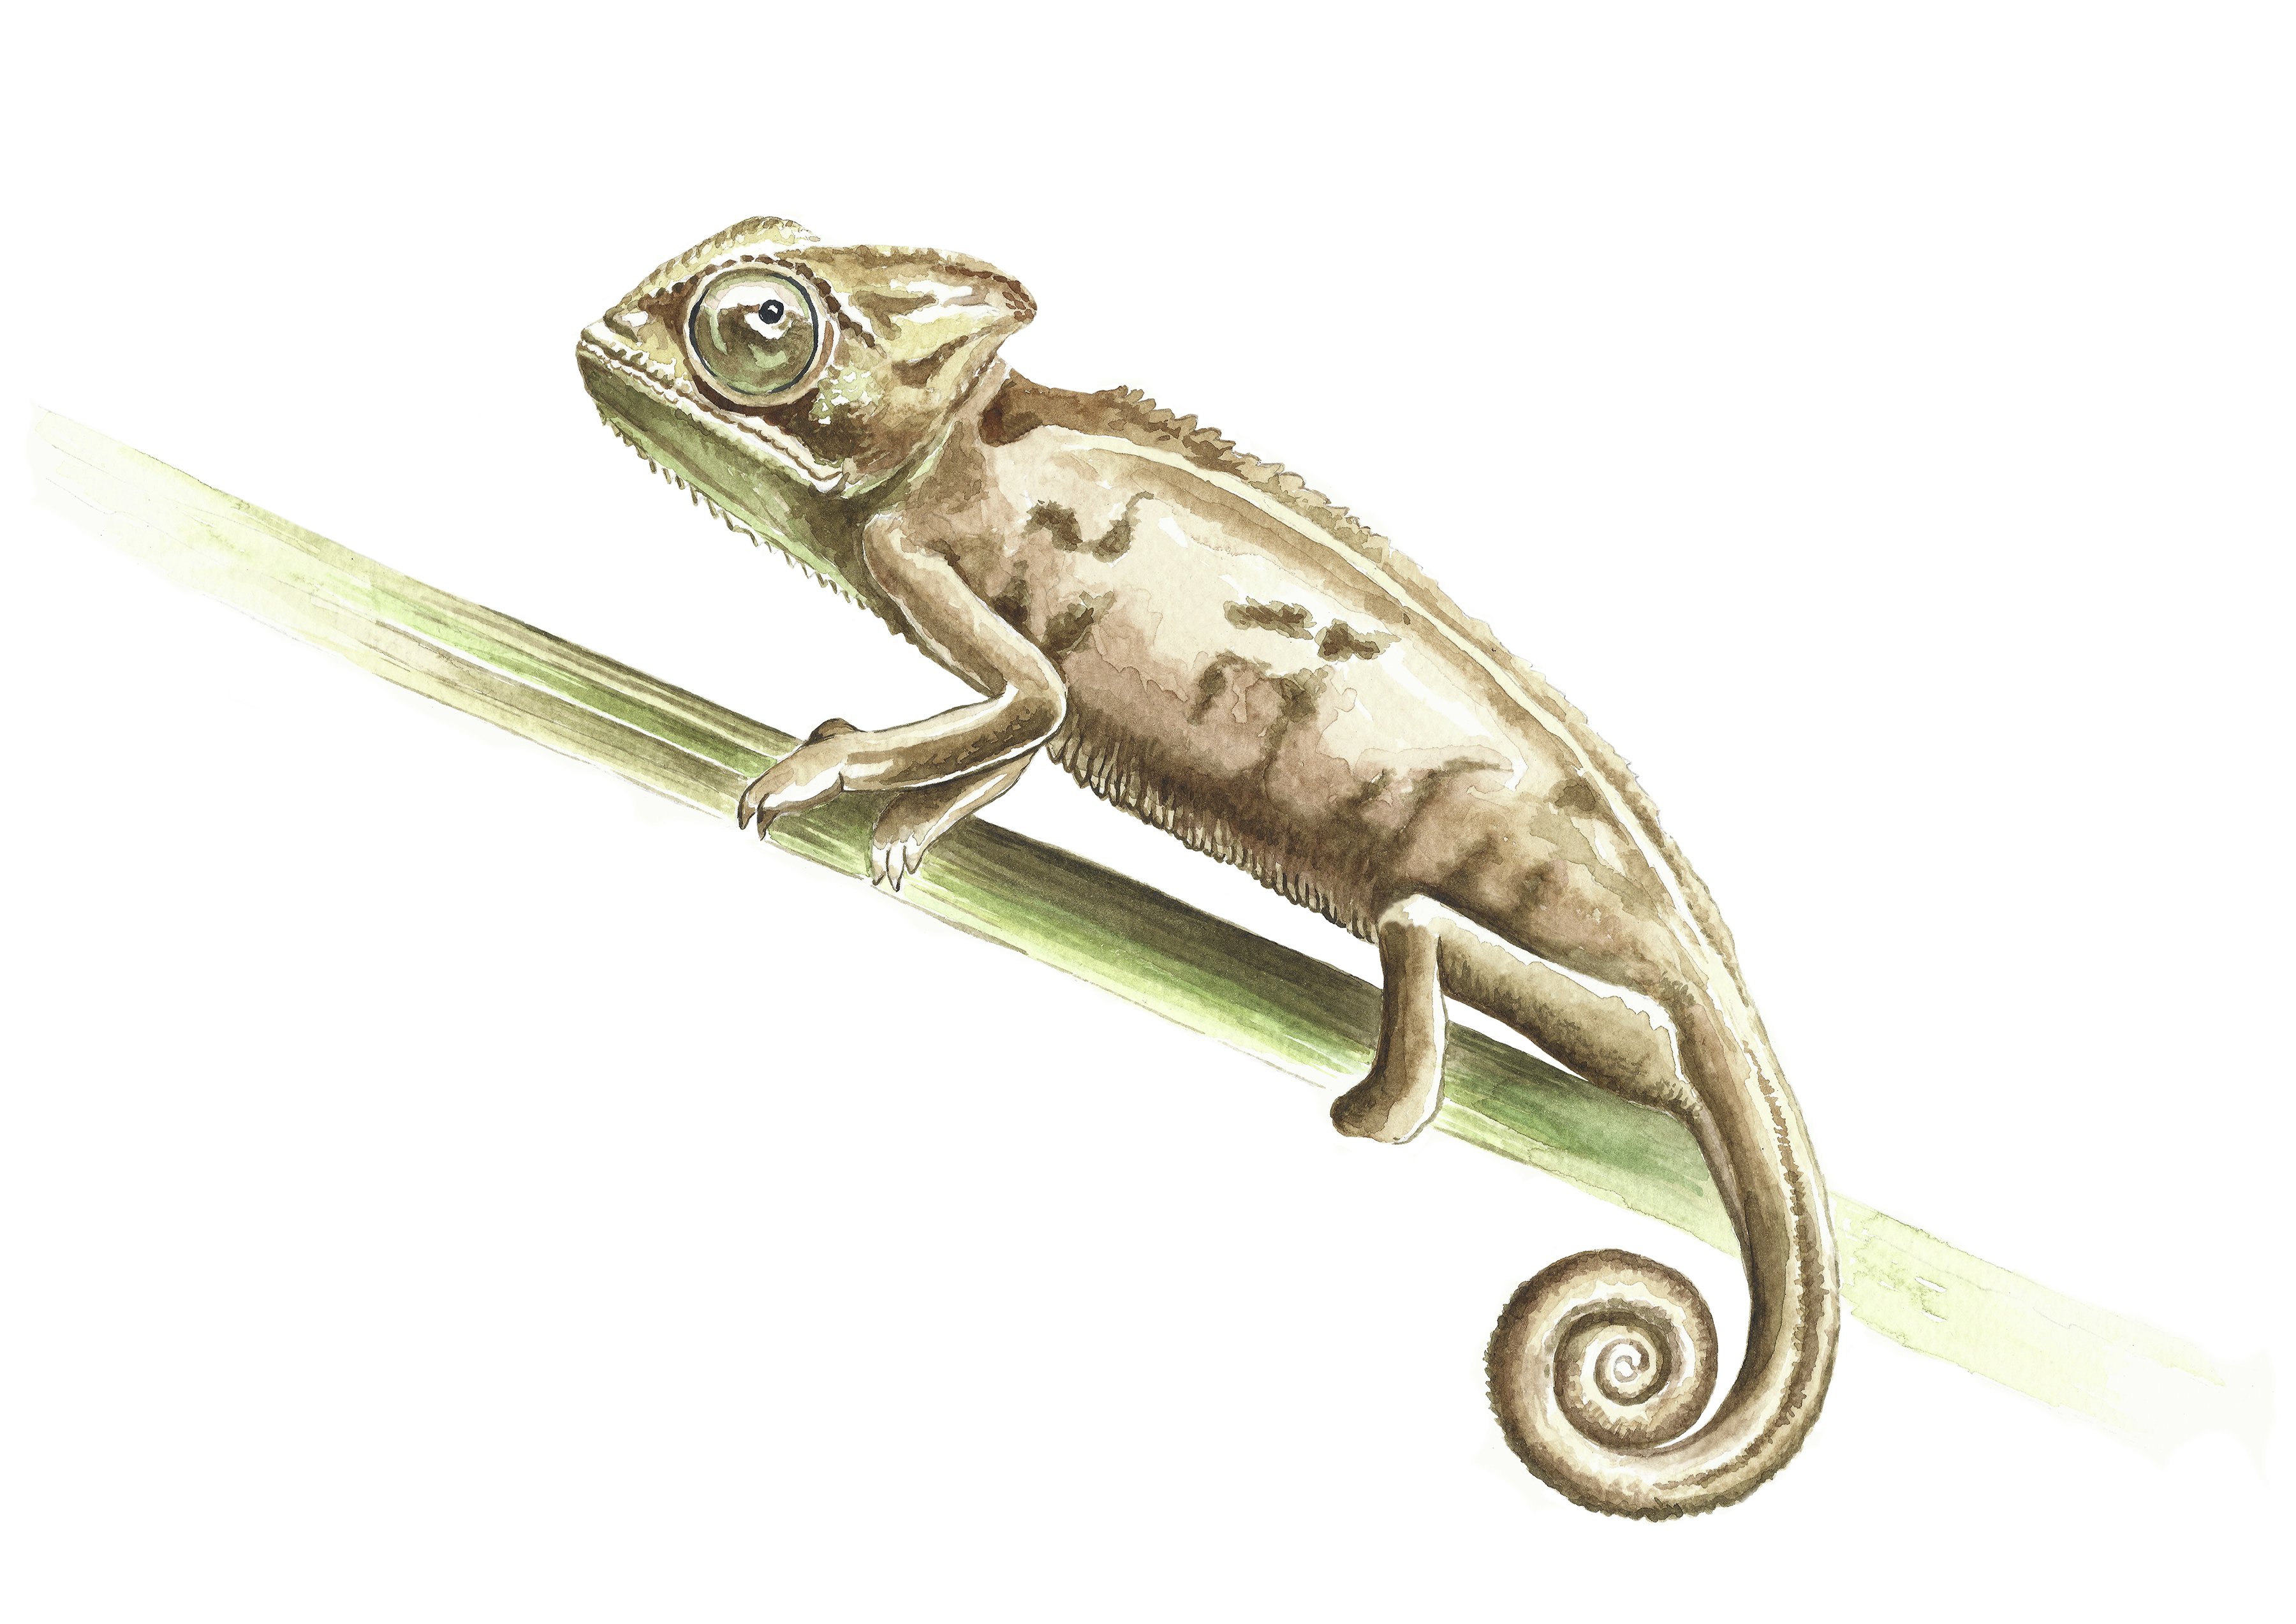 Chameleon in watercolor cover image.